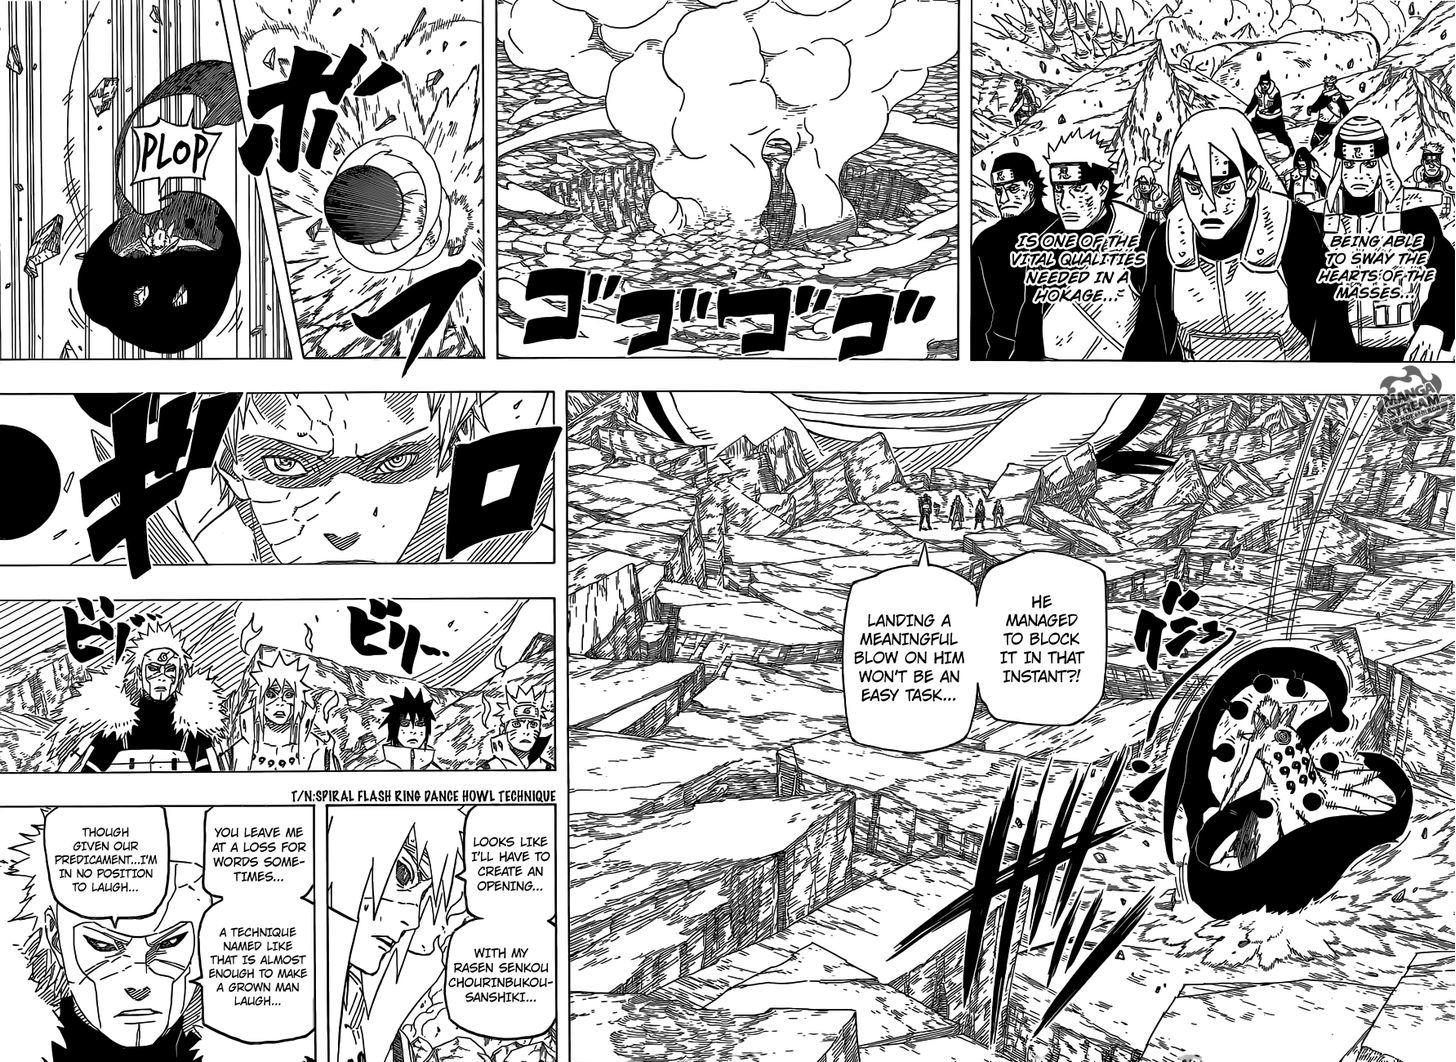 Vol.67 Chapter 641 – You Guys are the Main!! | 7 page